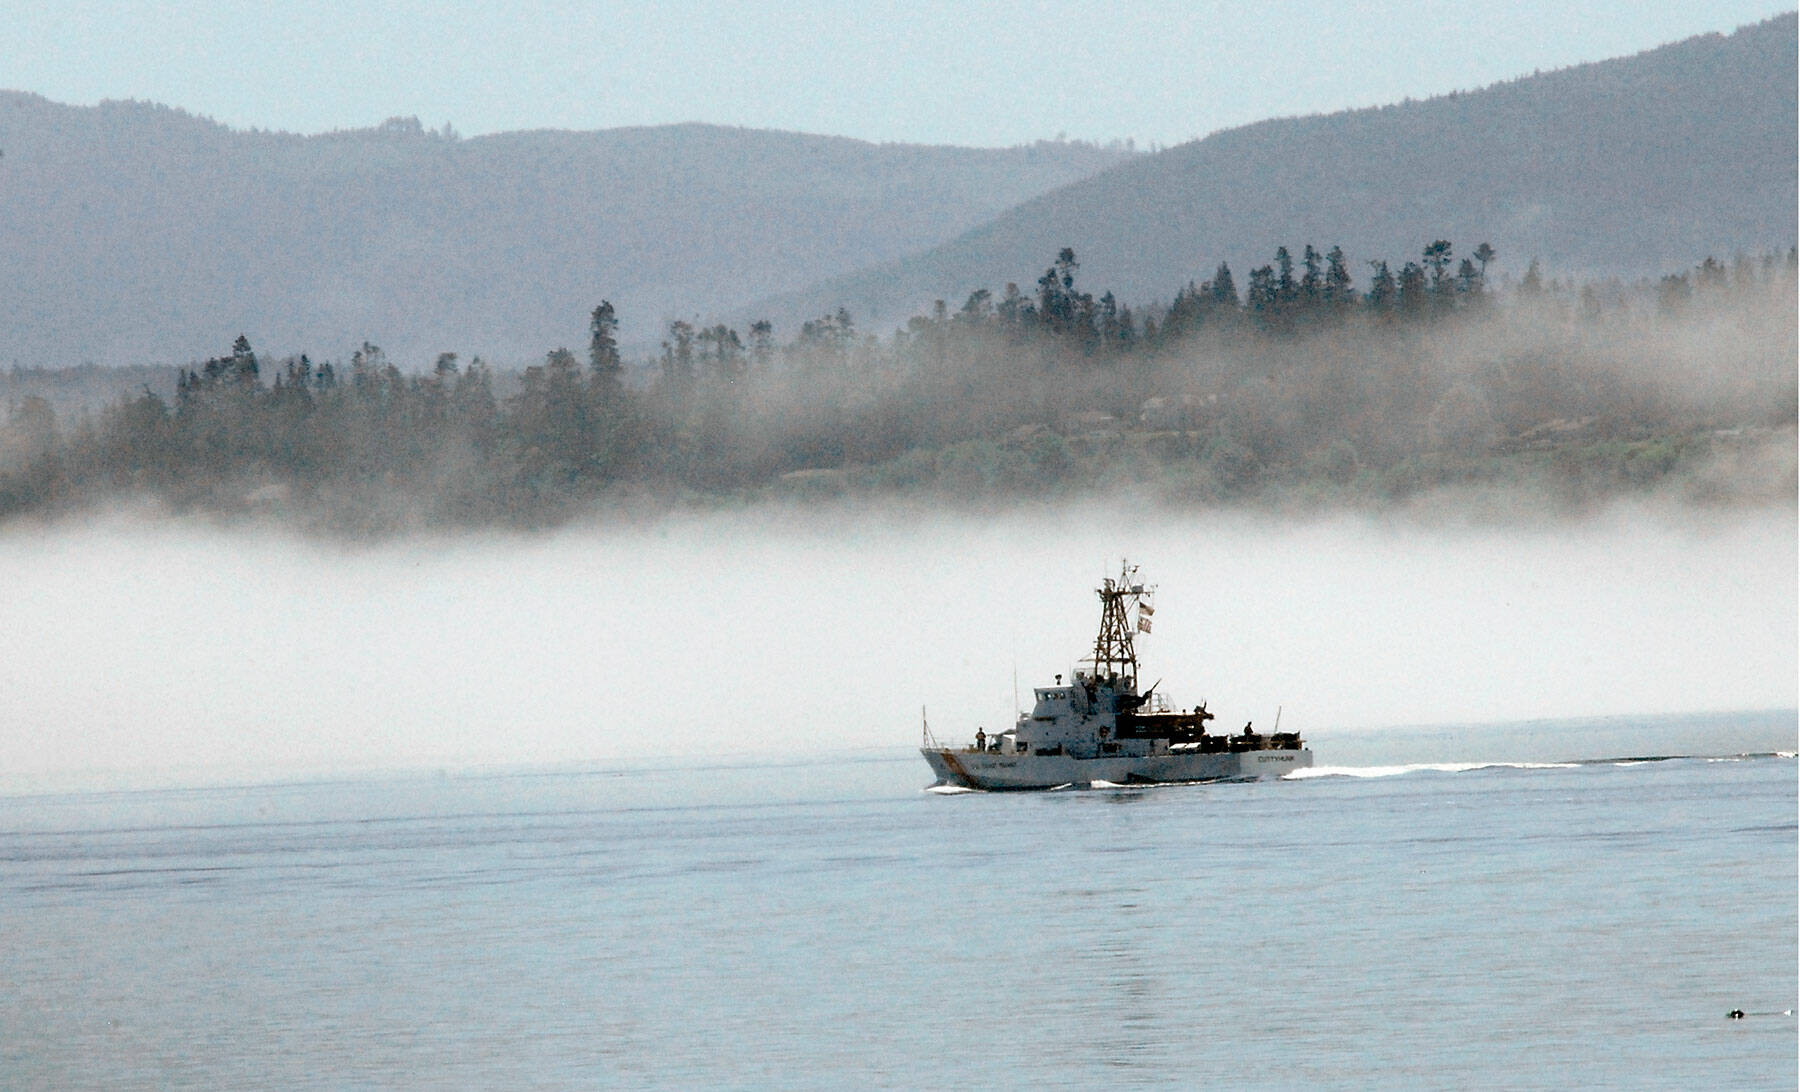 The U.S. Coast Guard cutter Cuttyhunk sails across Port Angeles Harbor against a backdrop of fog hugging the shoreline. in June 2020. Photo by Keith Thorpe/Olympic Peninsula News Group